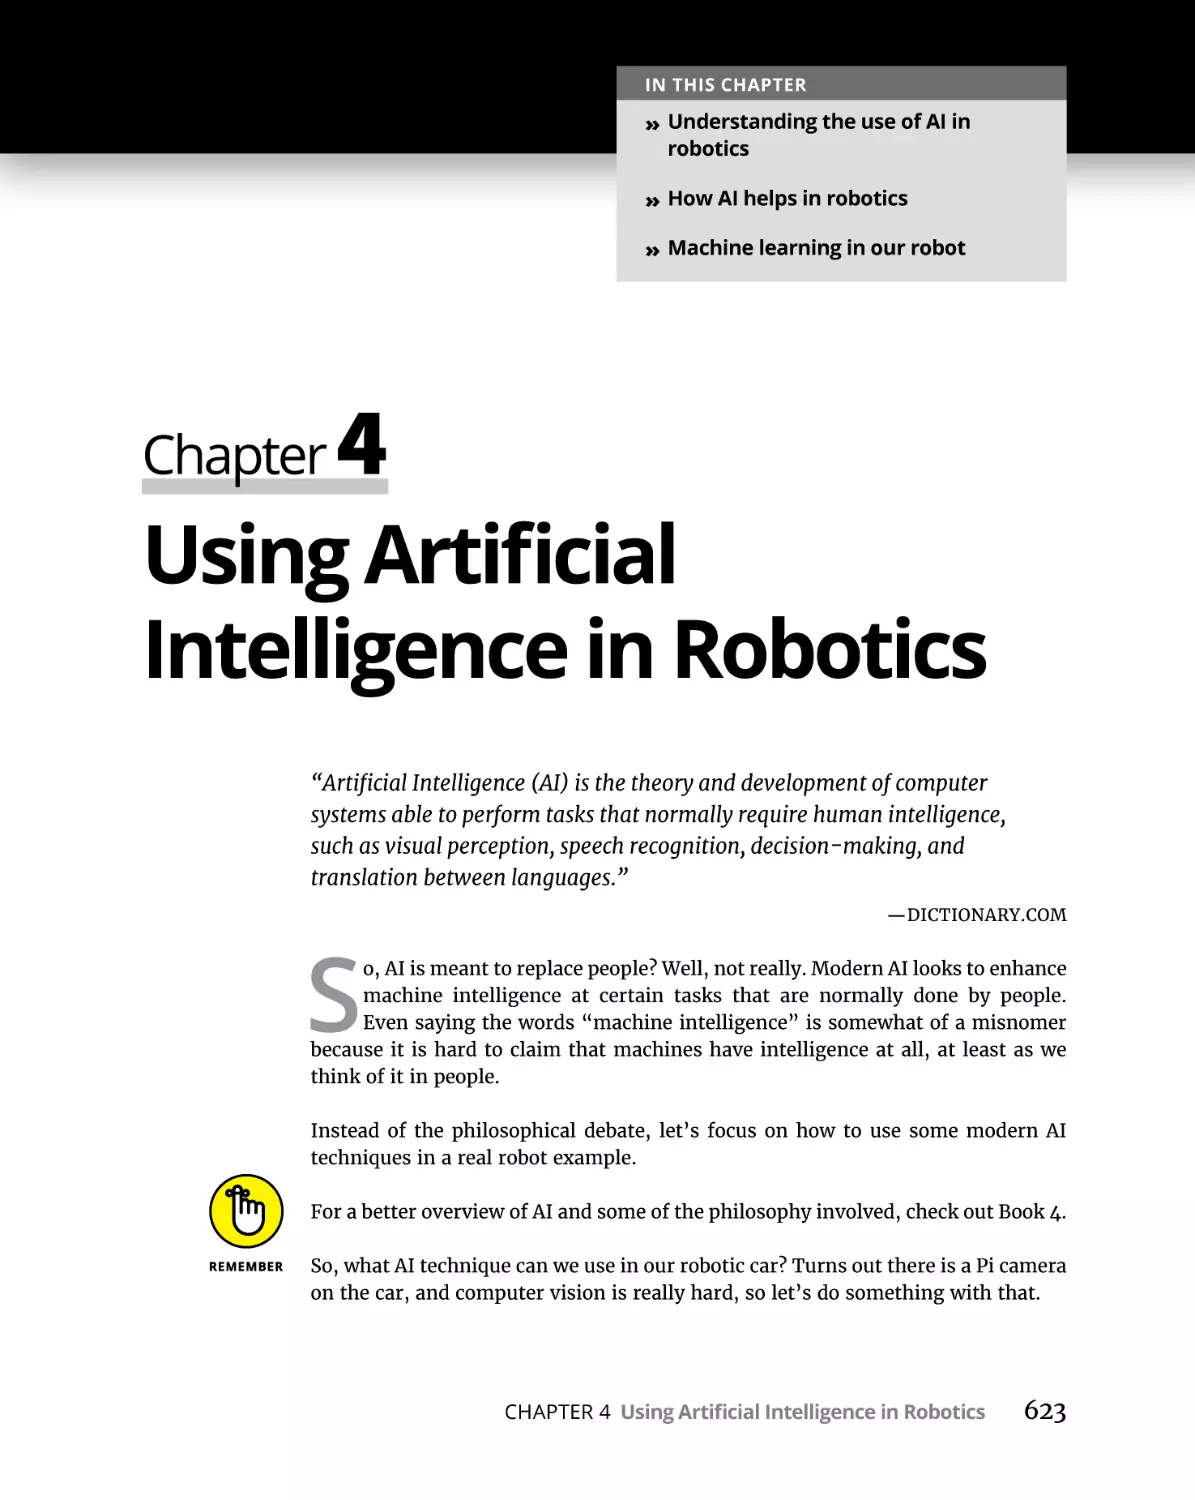 Chapter 4 Using Artificial Intelligence in Robotics